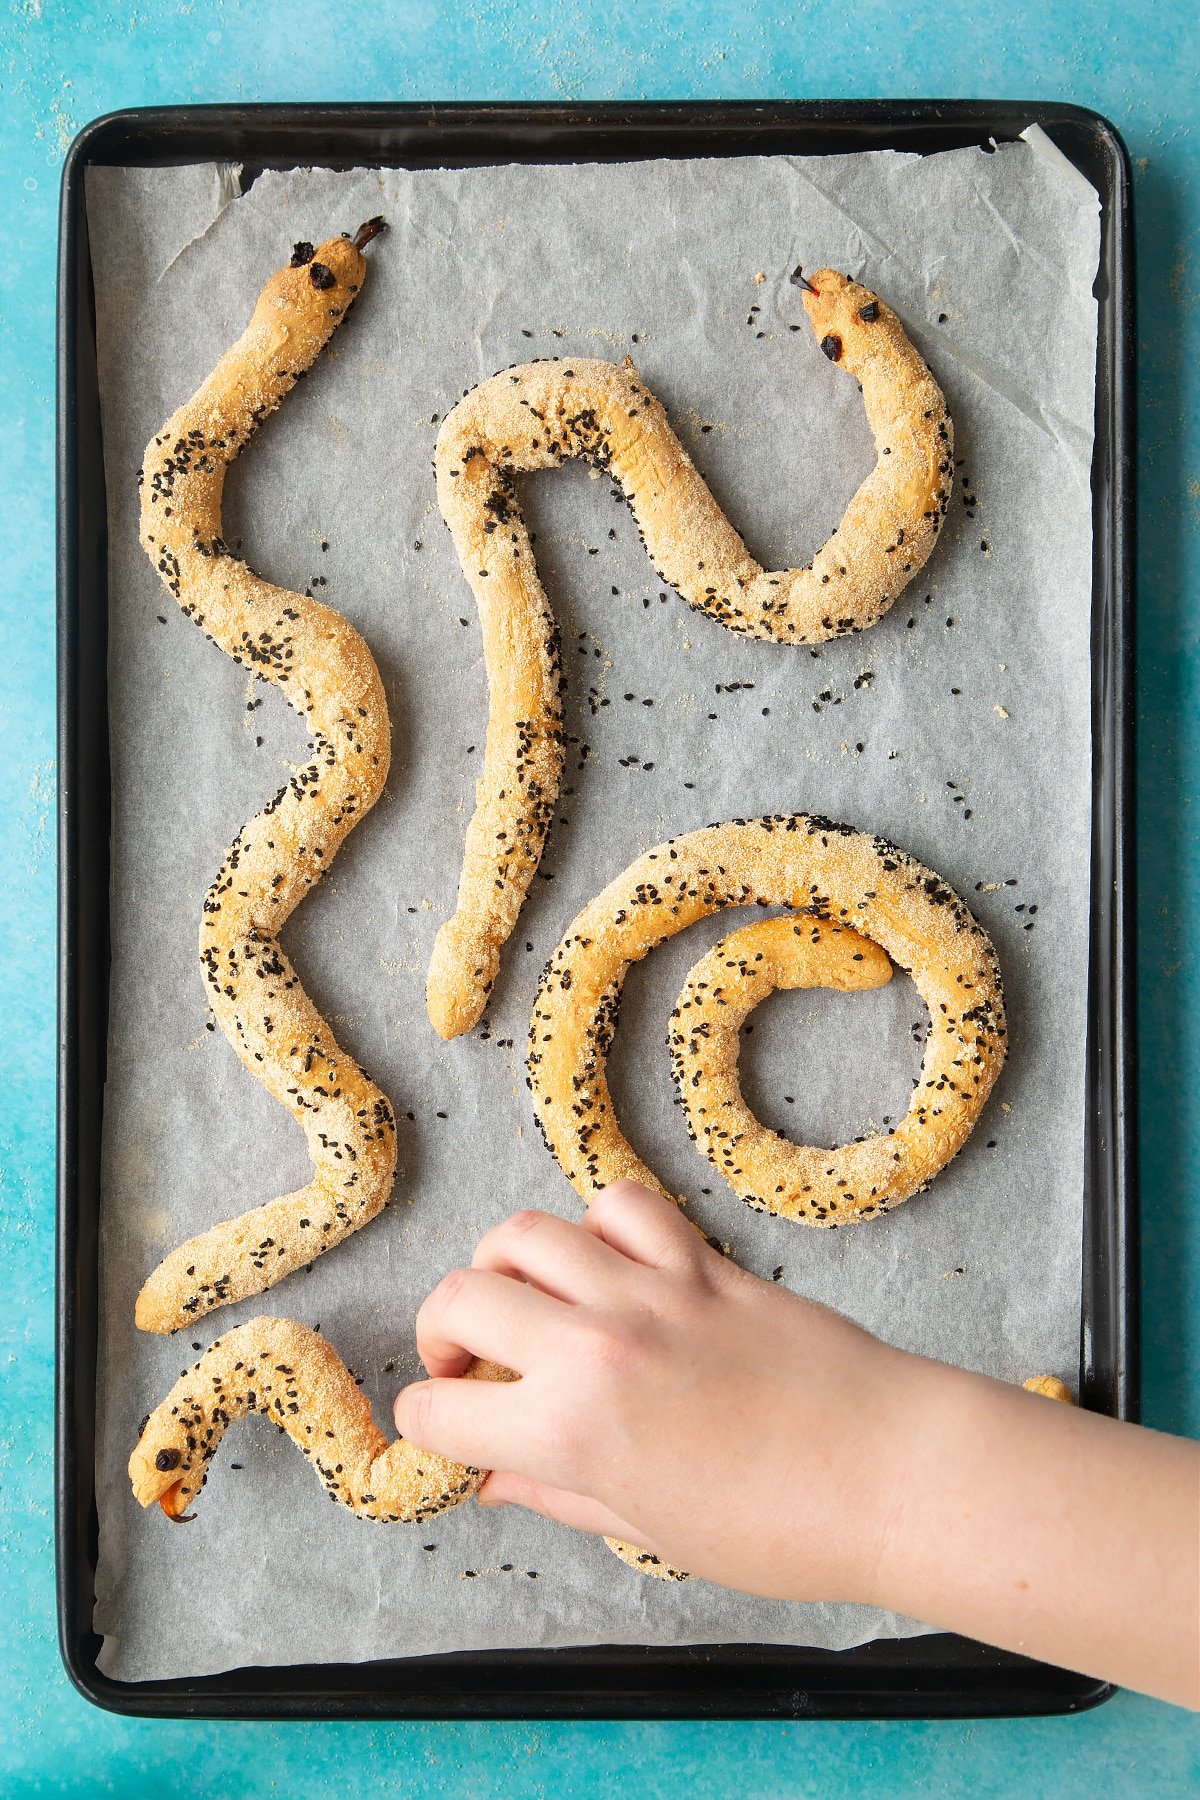 A lined baking tray with freshly baked bread snakes. A hand reaches to take one.